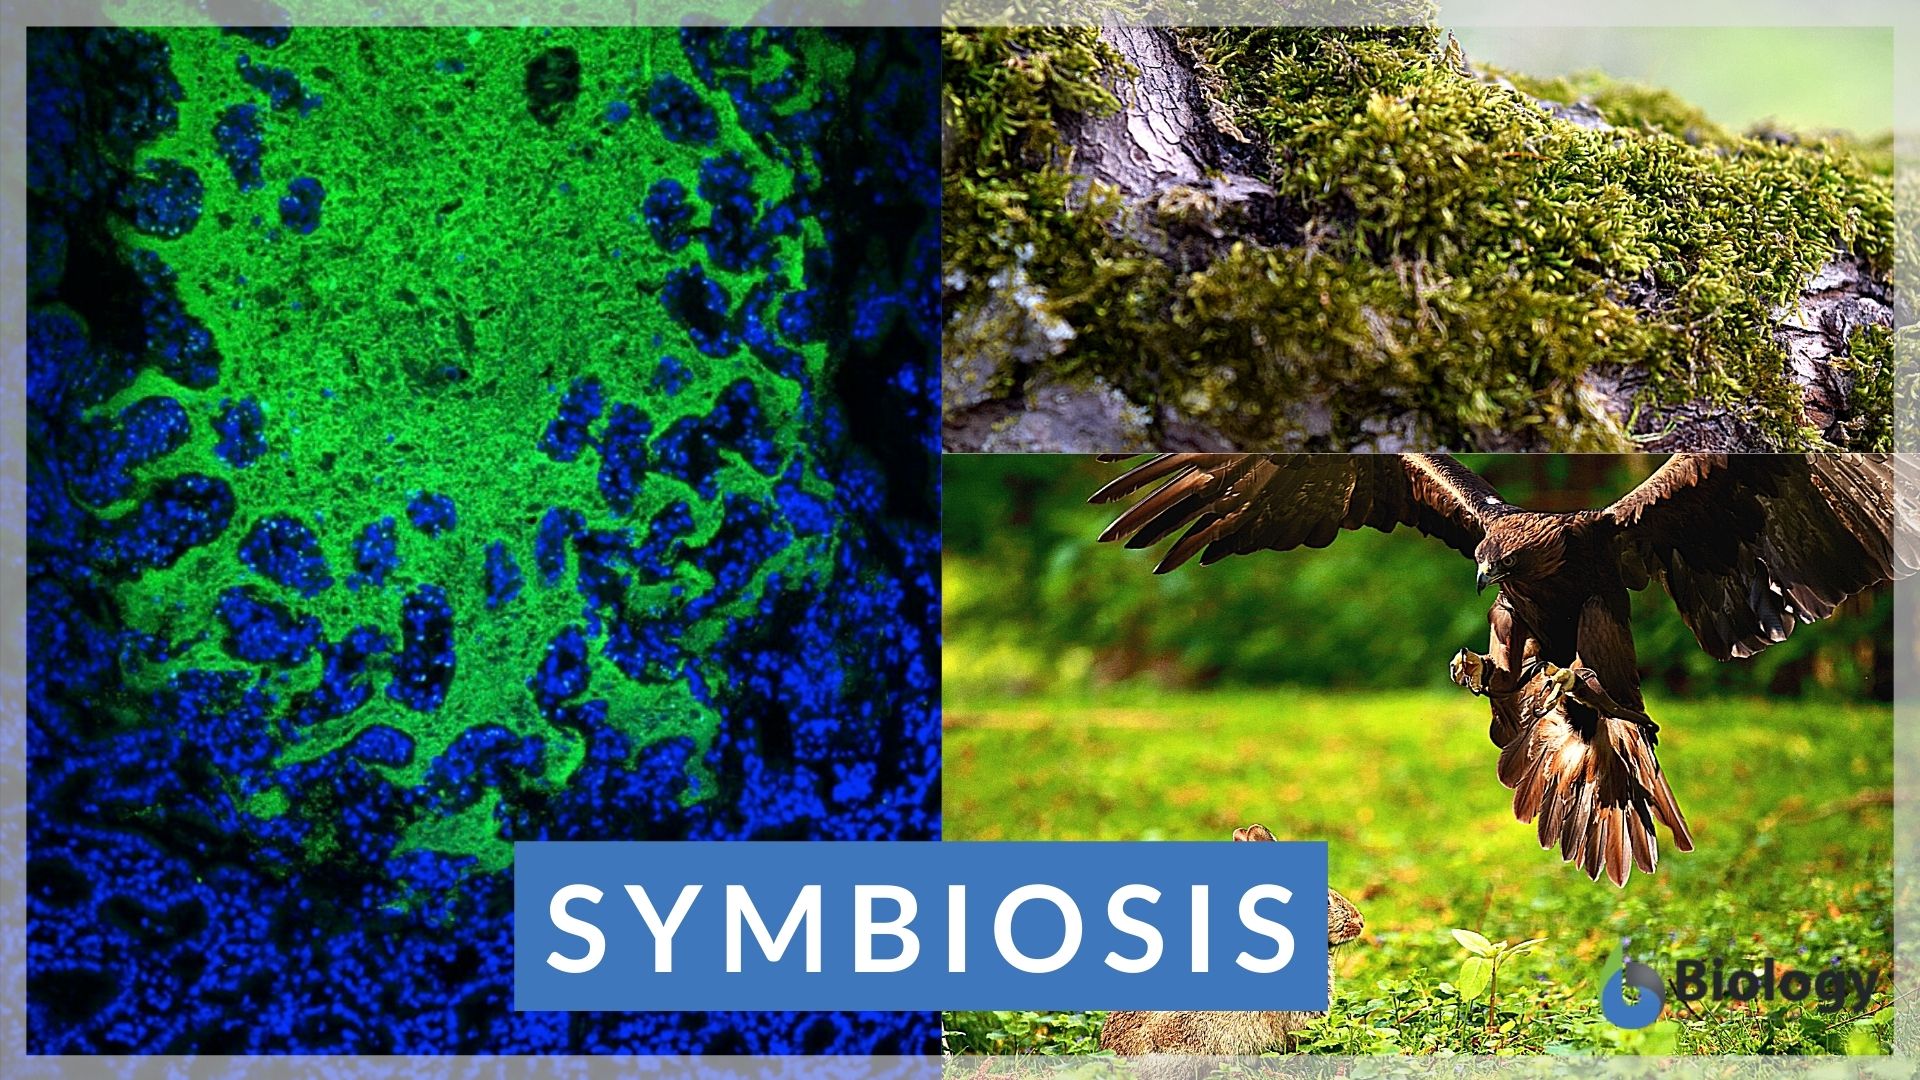 Symbiosis - Definition and Examples - Biology Online Dictionary